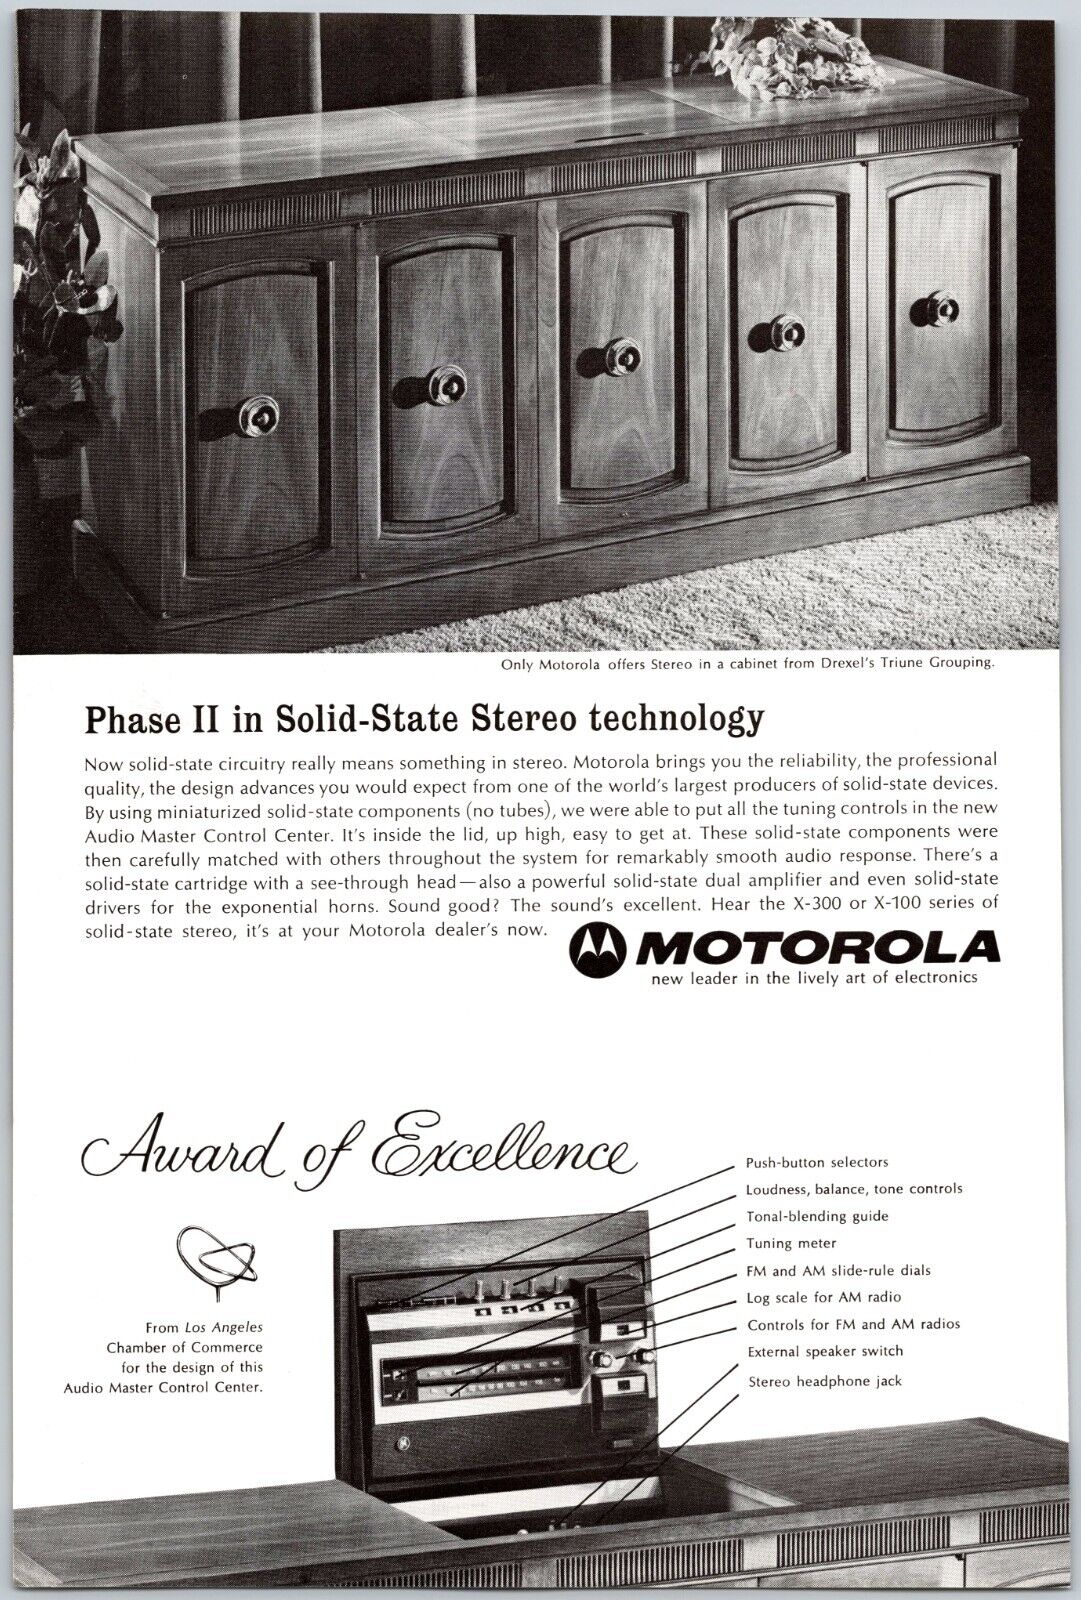 1966 Motorola Solid State Stereo Phase II Auto Master Control Center Print Ad